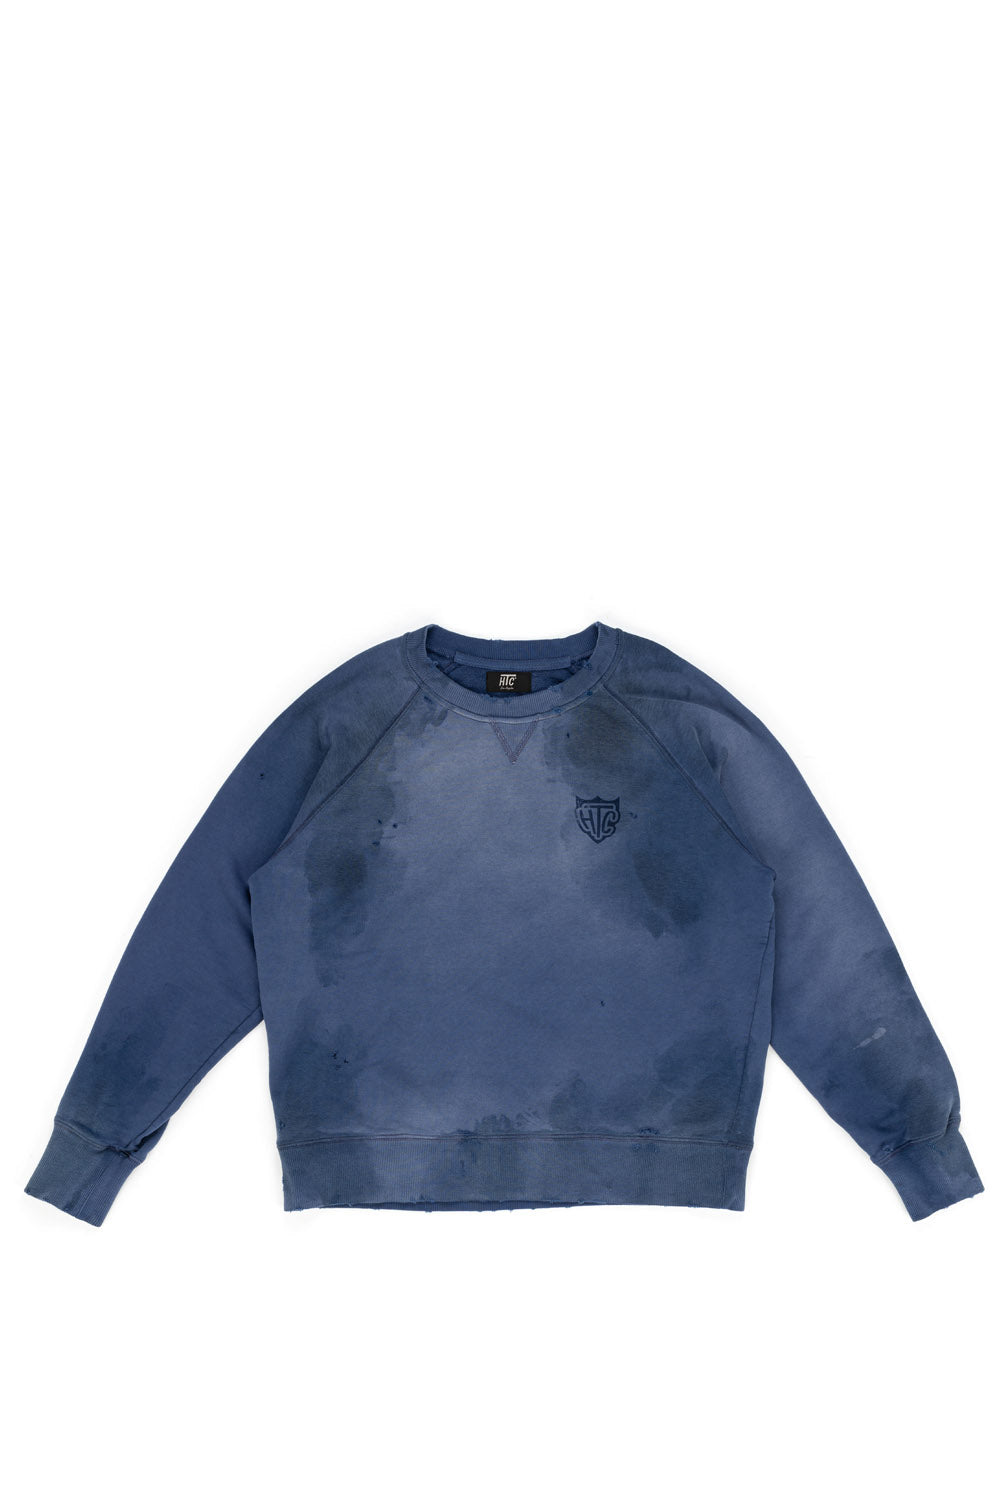 WASHED OUT CREWNECK